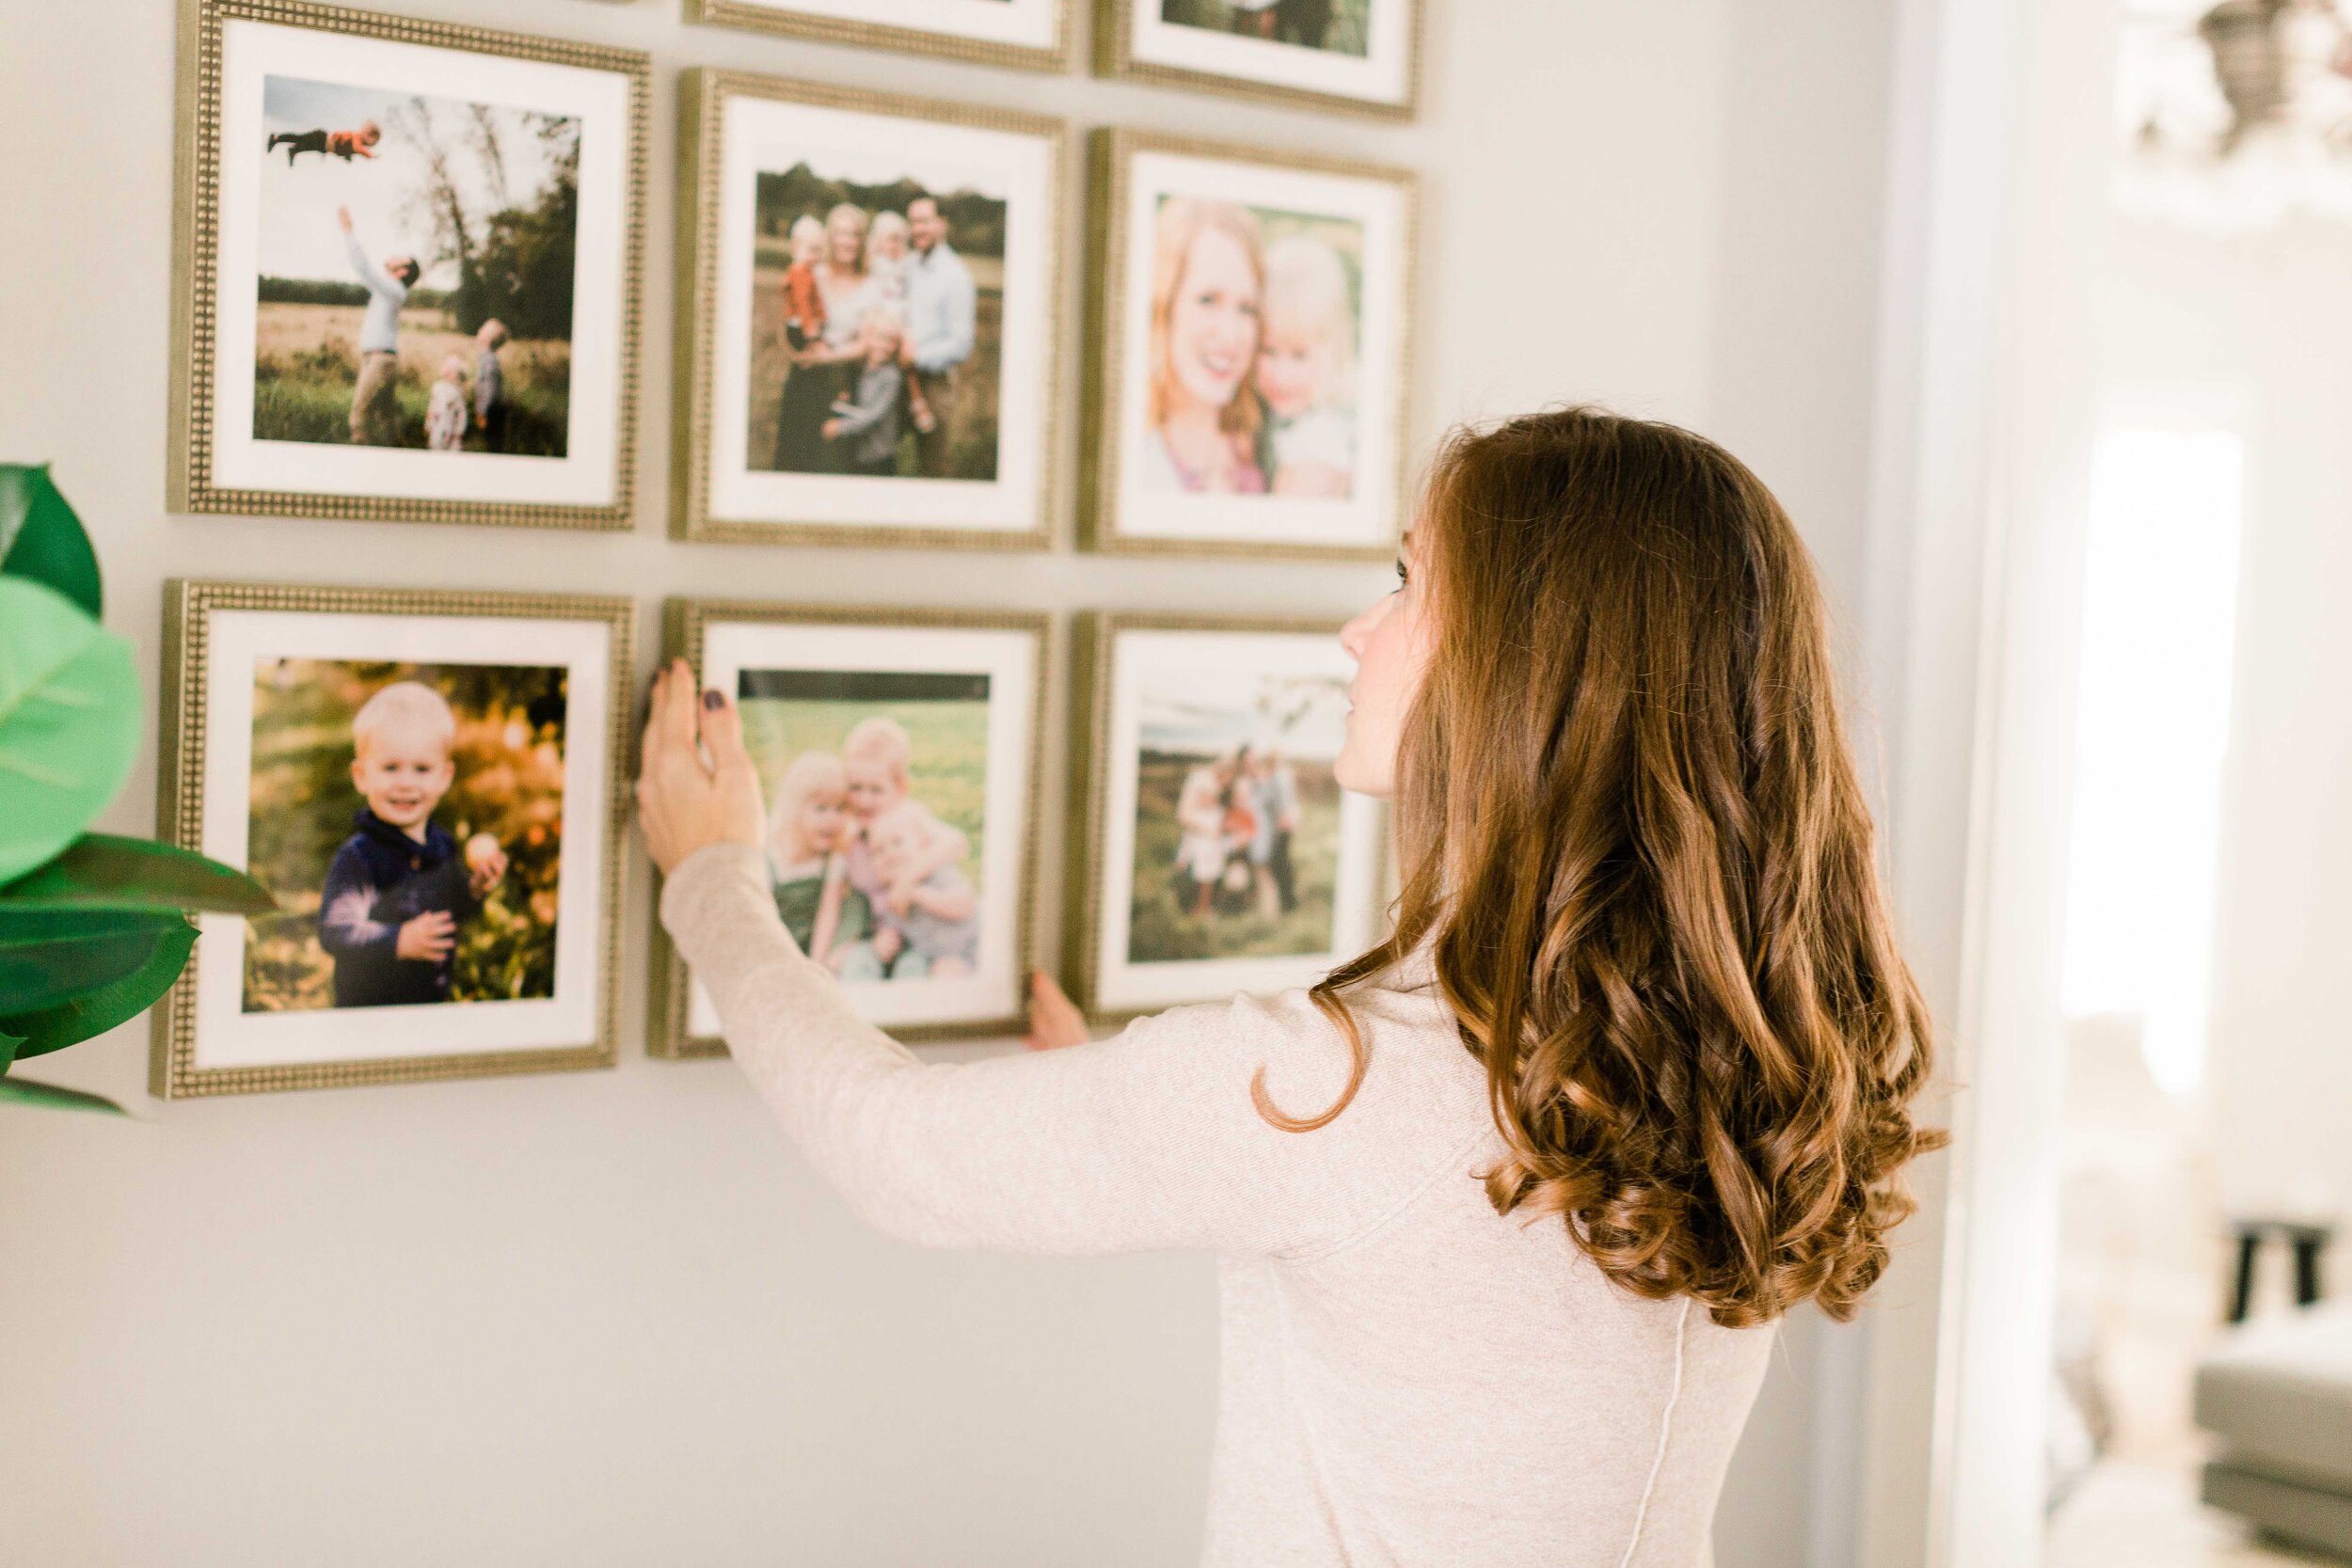 Are you wanting to finally get those family photos hung on the walls but wondering how should you arrange your gallery wall or display your family photos? Here is the ultimate guide to hanging family photos! Kelly McPhail Photography is based in Laf…